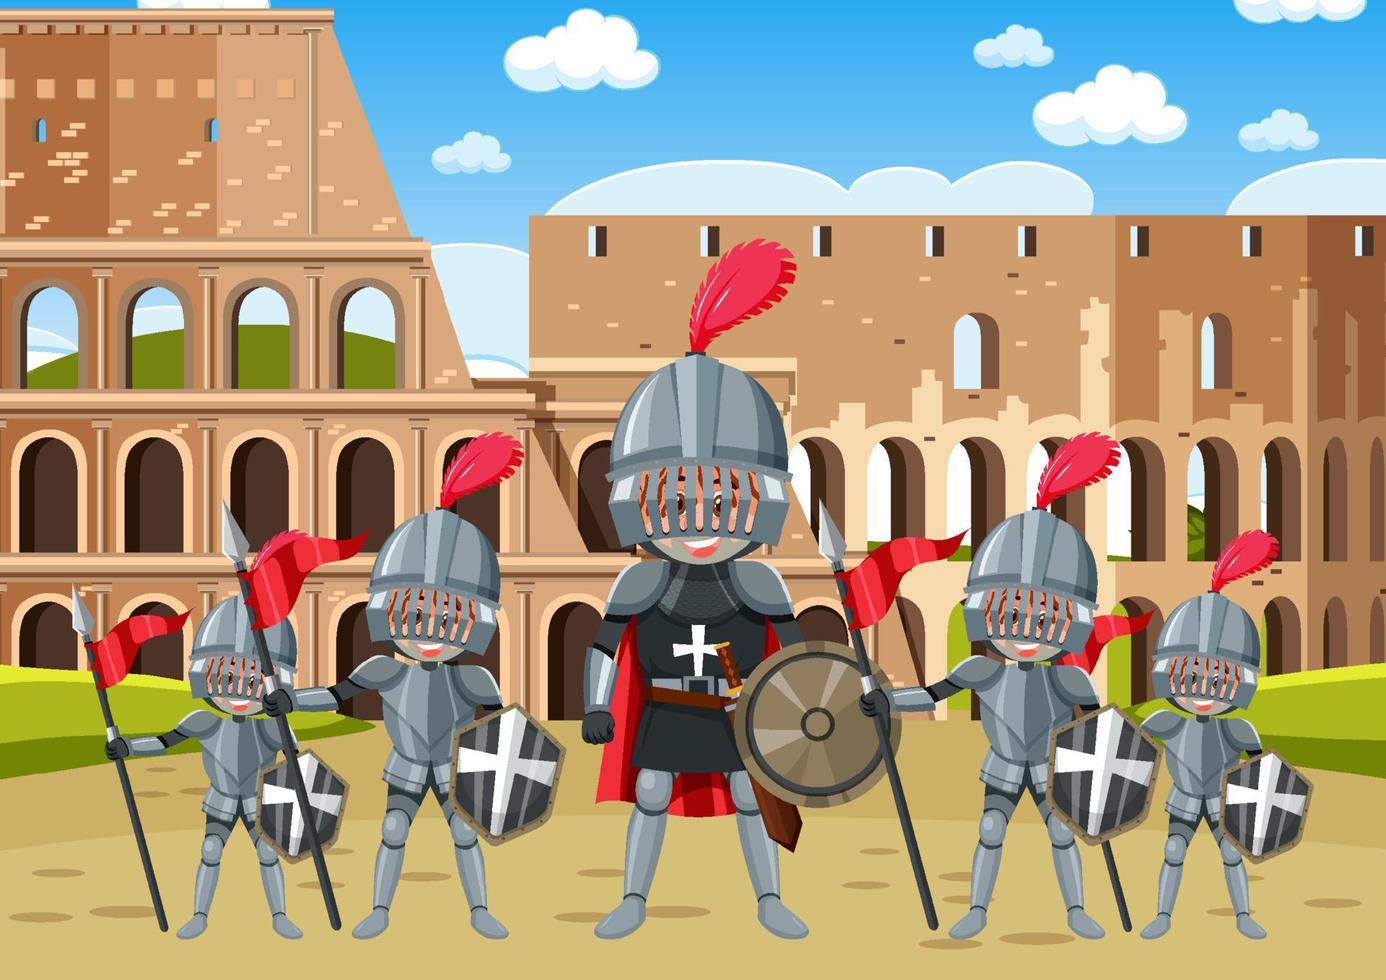 Medieval scene with armor knights cartoon characters vector